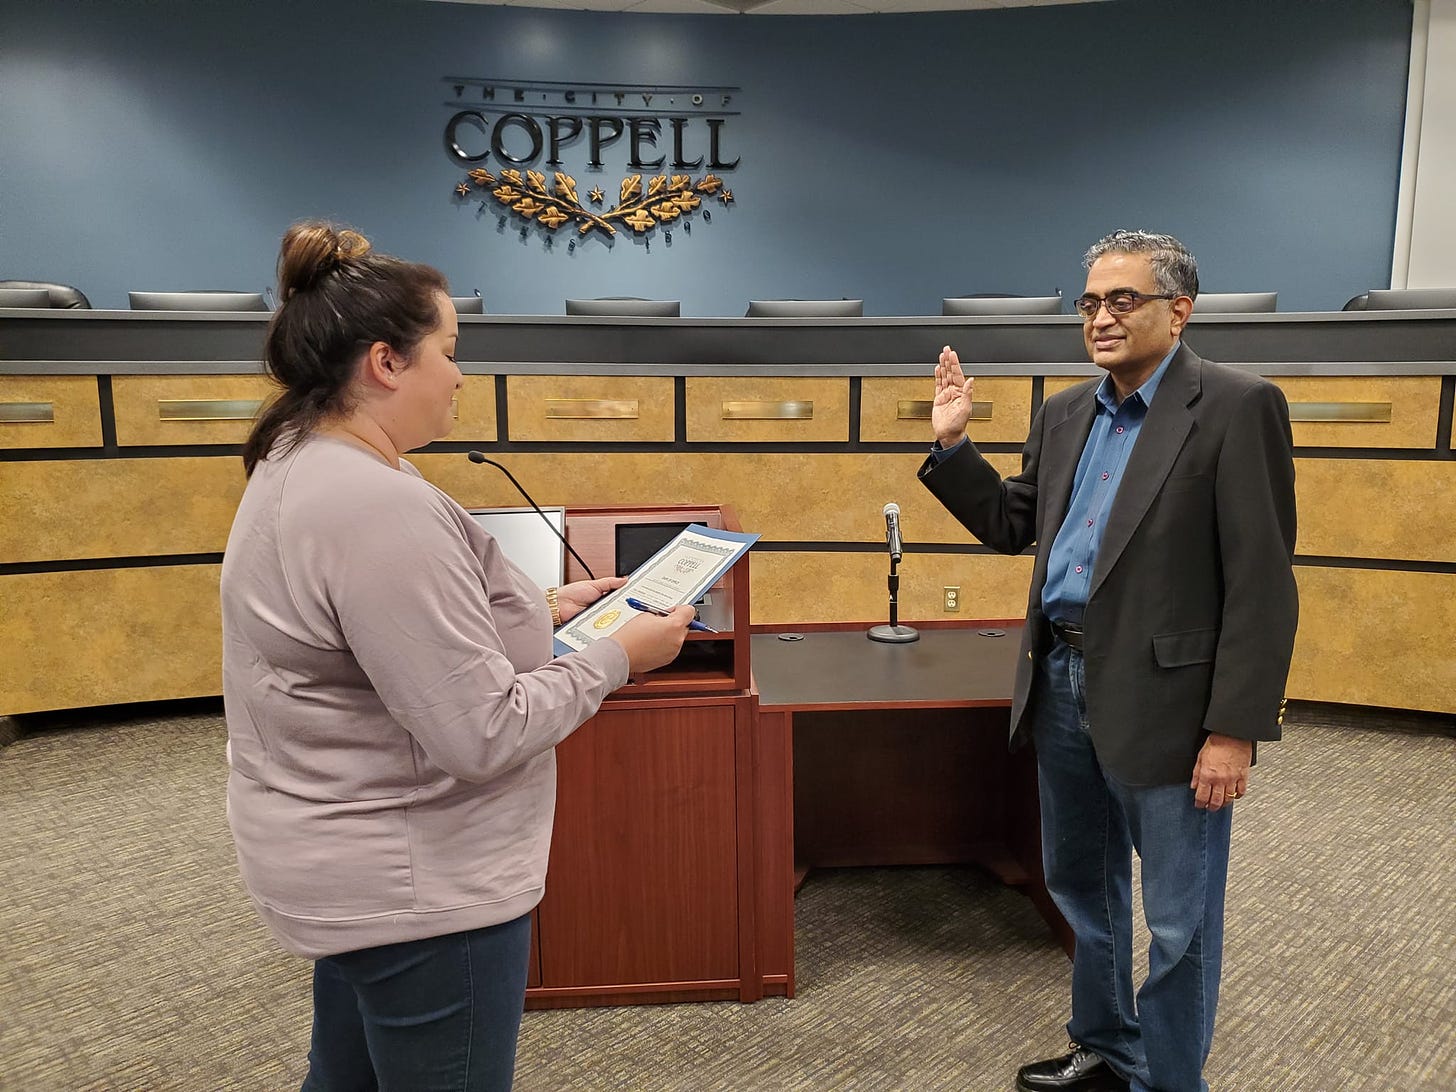 Venky Venkatraman takes his oath of office as a member of Coppell's Conduct Review Board.